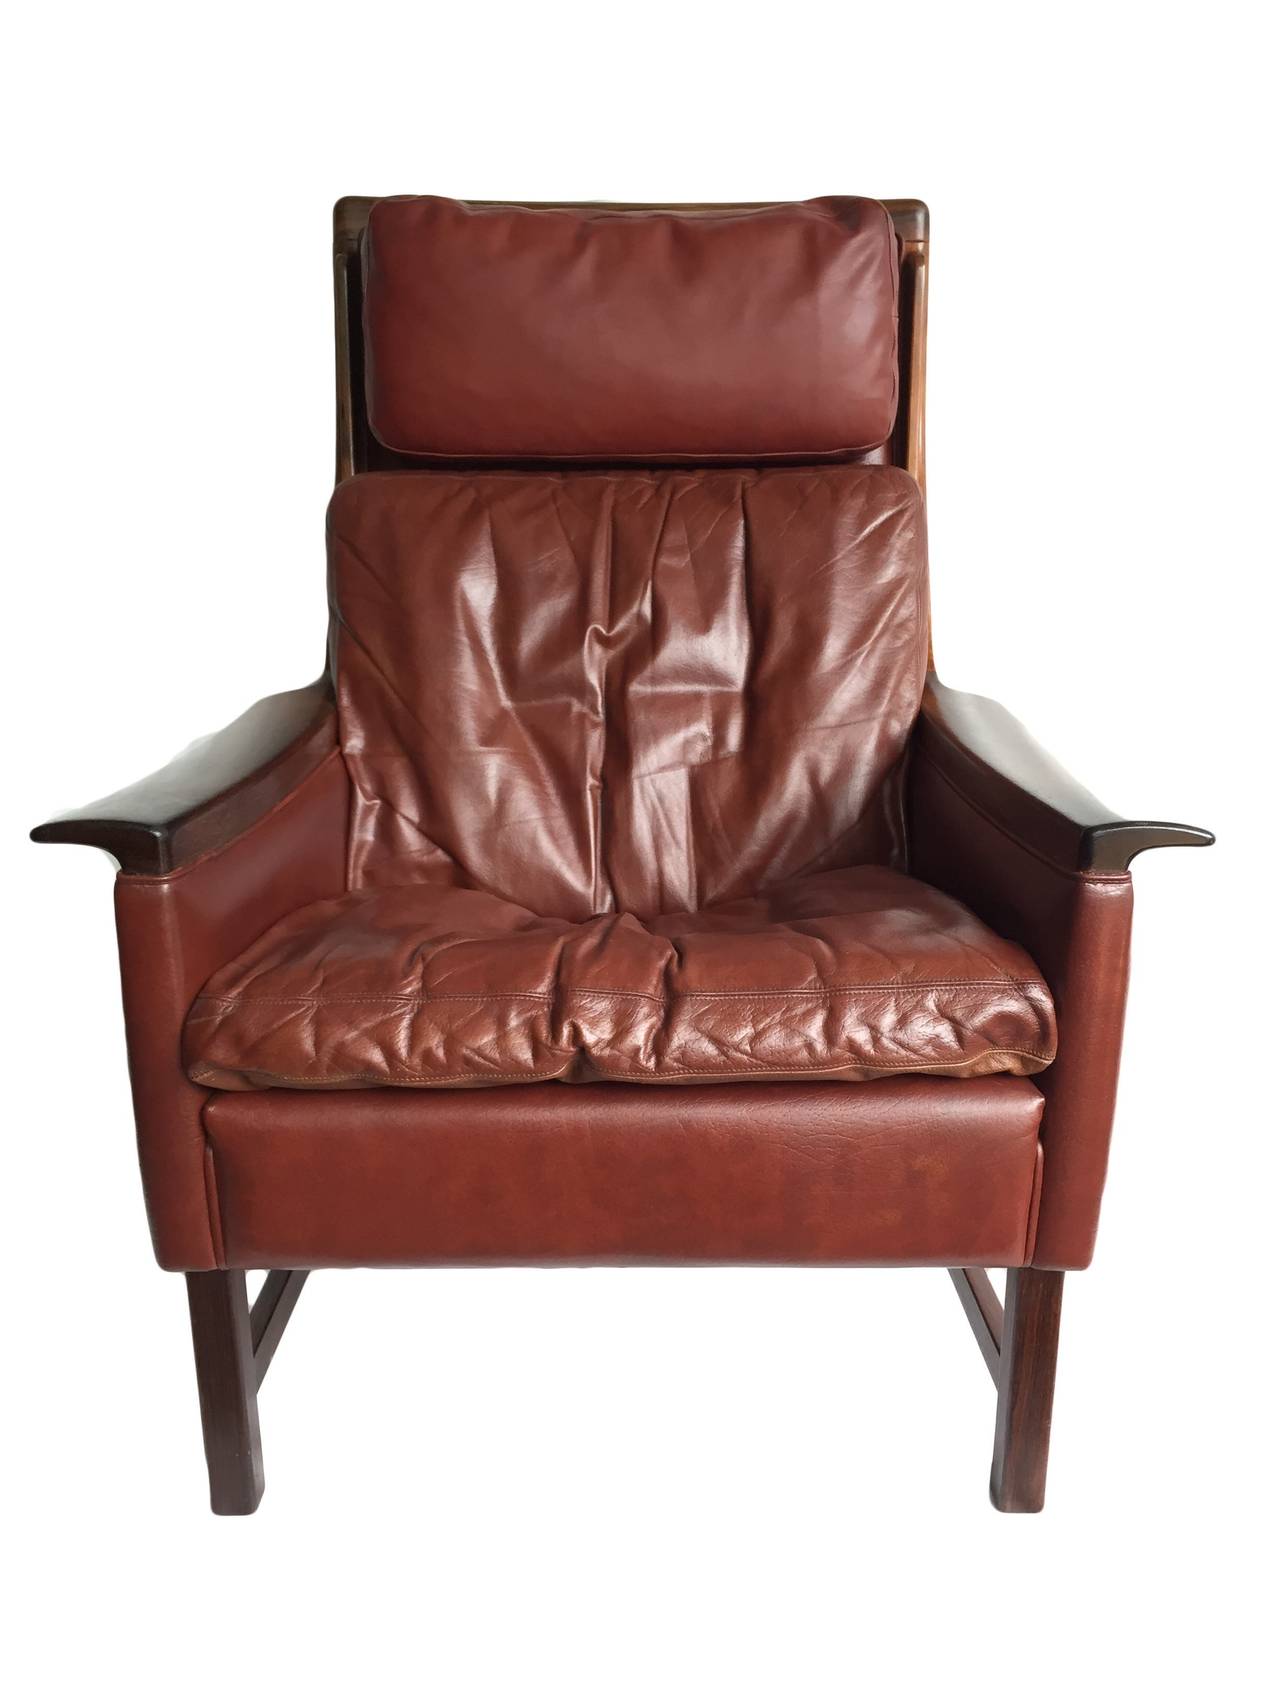 Rare Torbjørn Afdal wing armchair and ottoman.
Solid Brazilian rosewood and deep red leather.
Nesjestranda, Norway, 1960.